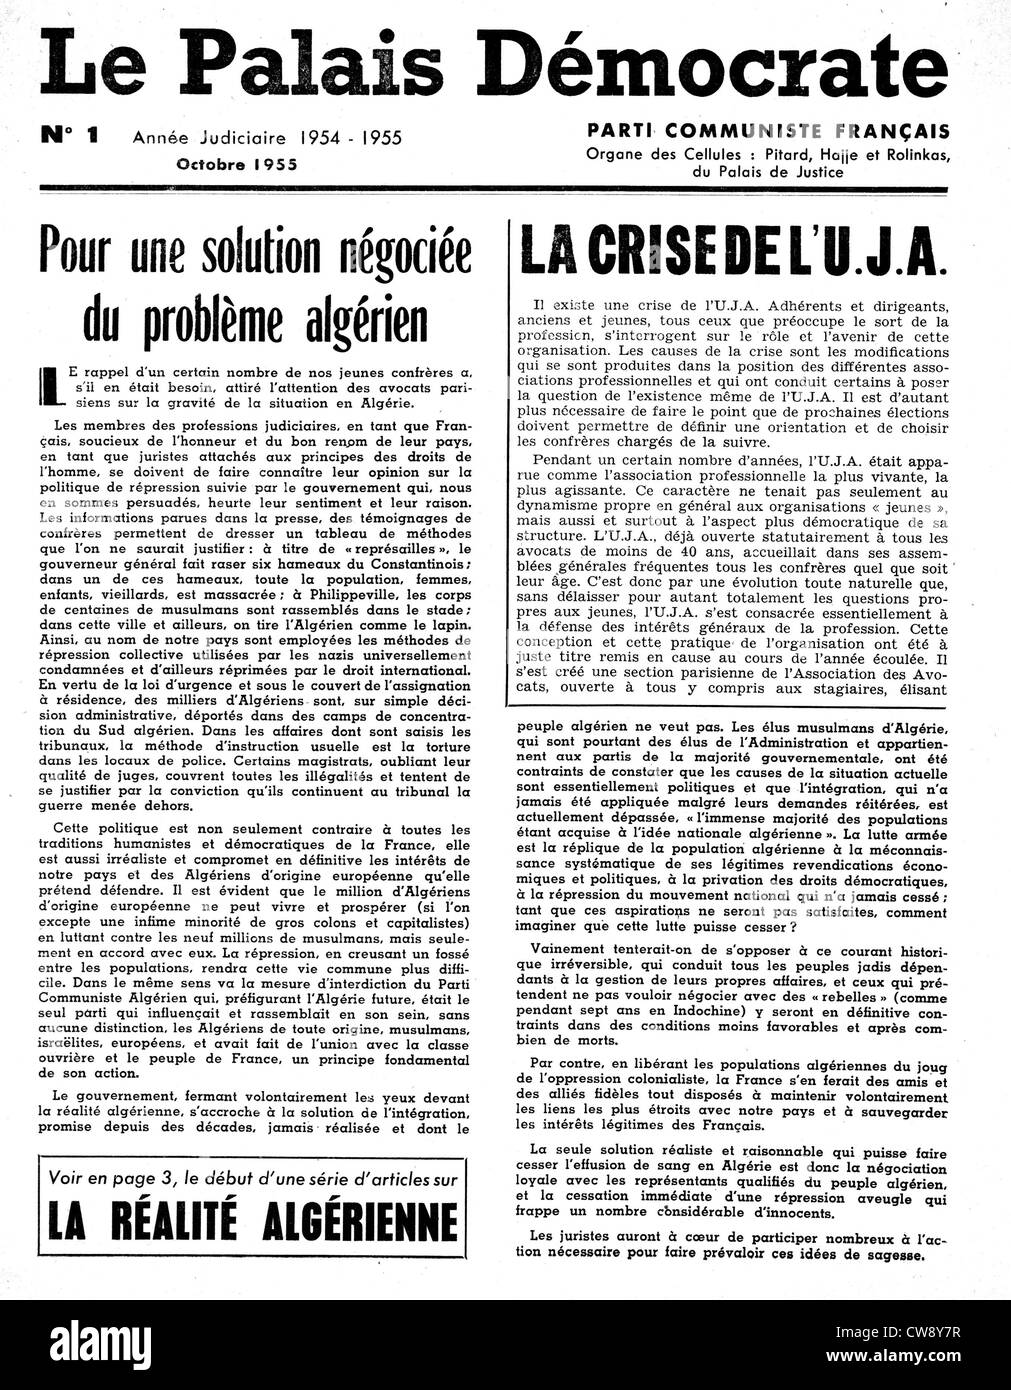 Magazine French Communist Party 'Le palais démocrate' no. 1 evoking events in Algeria Stock Photo